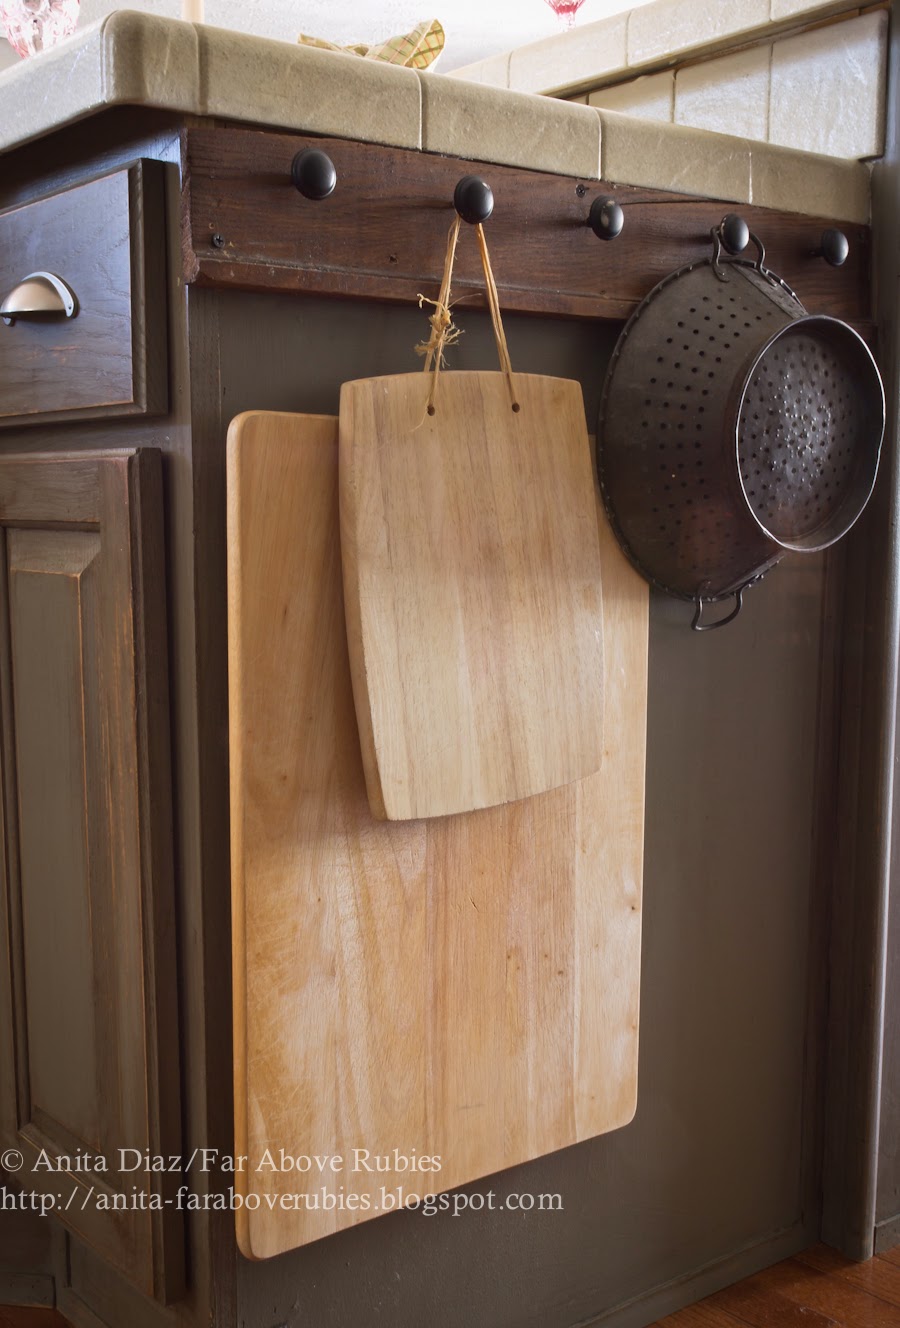 Cutting Board Storage Ideas  Where to Store Cutting Boards?